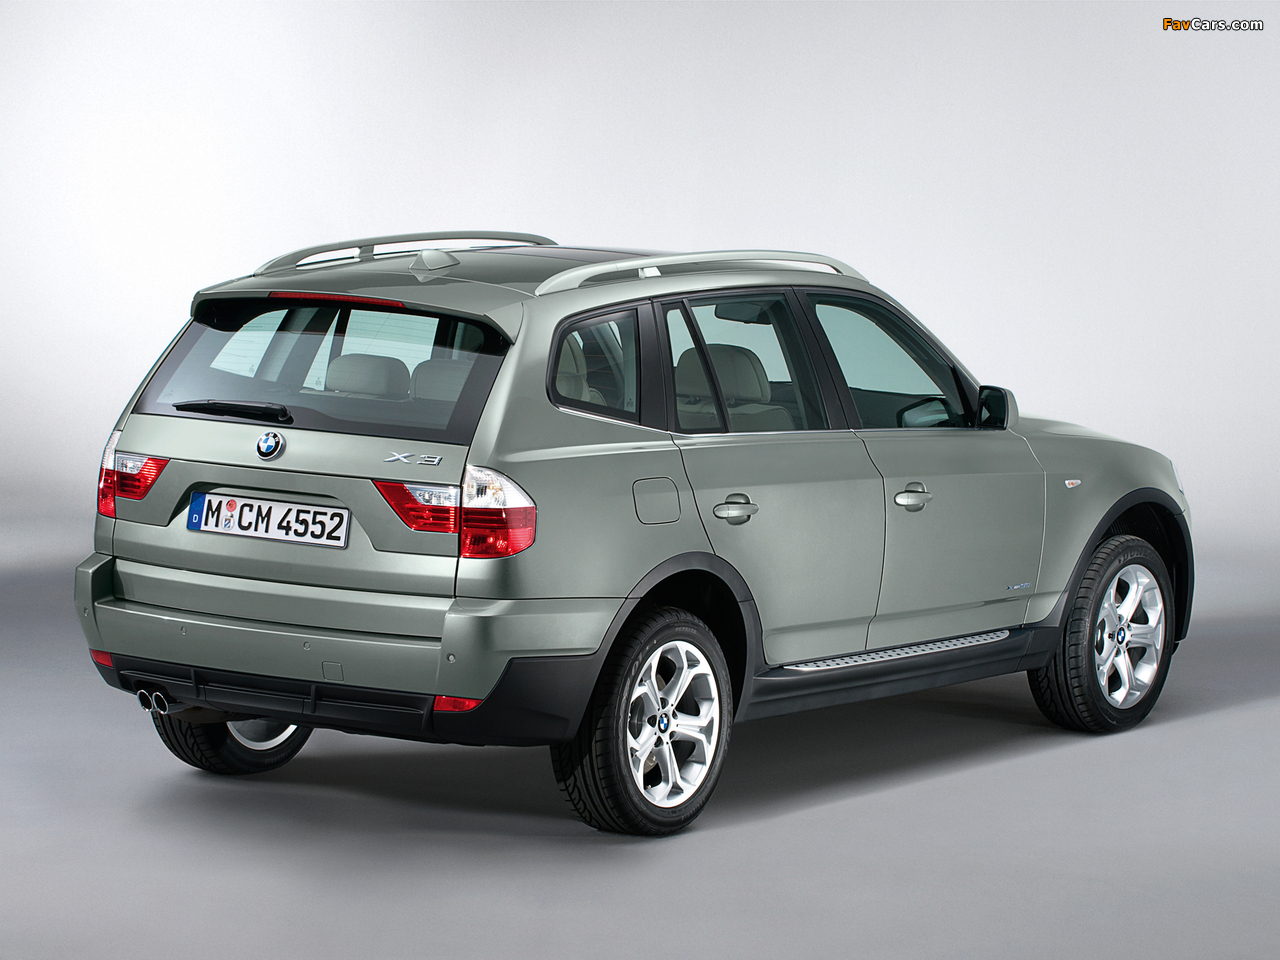 BMW X3 xDrive30i Exclusive Edition (E83) 2008 wallpapers (1280 x 960)